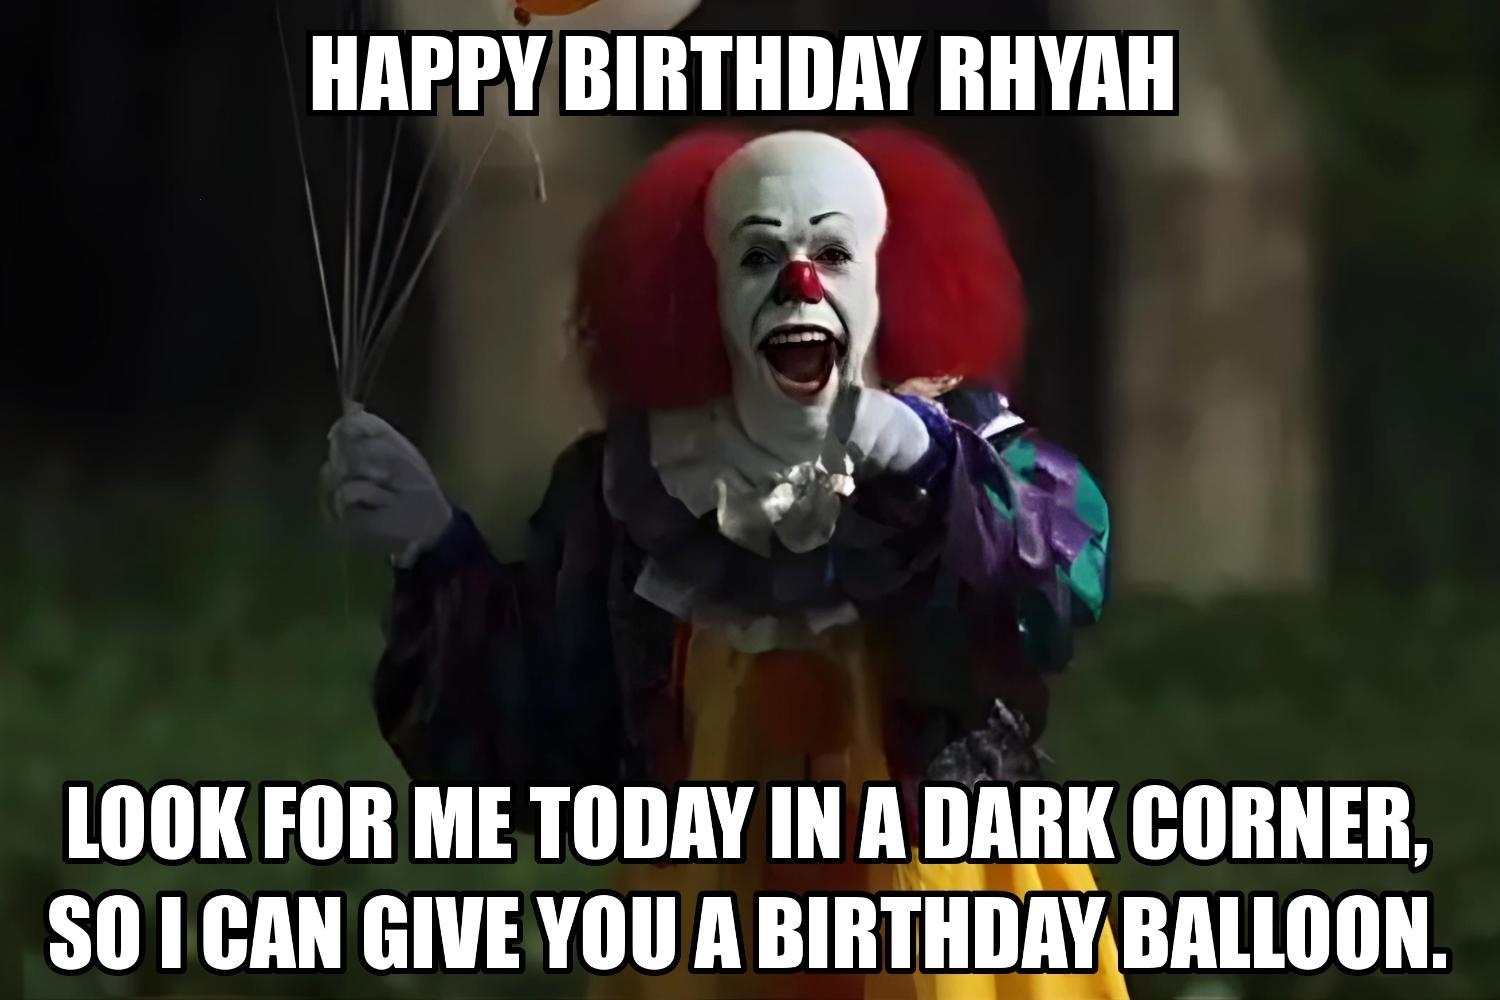 Happy Birthday Rhyah I Can Give You A Balloon Meme